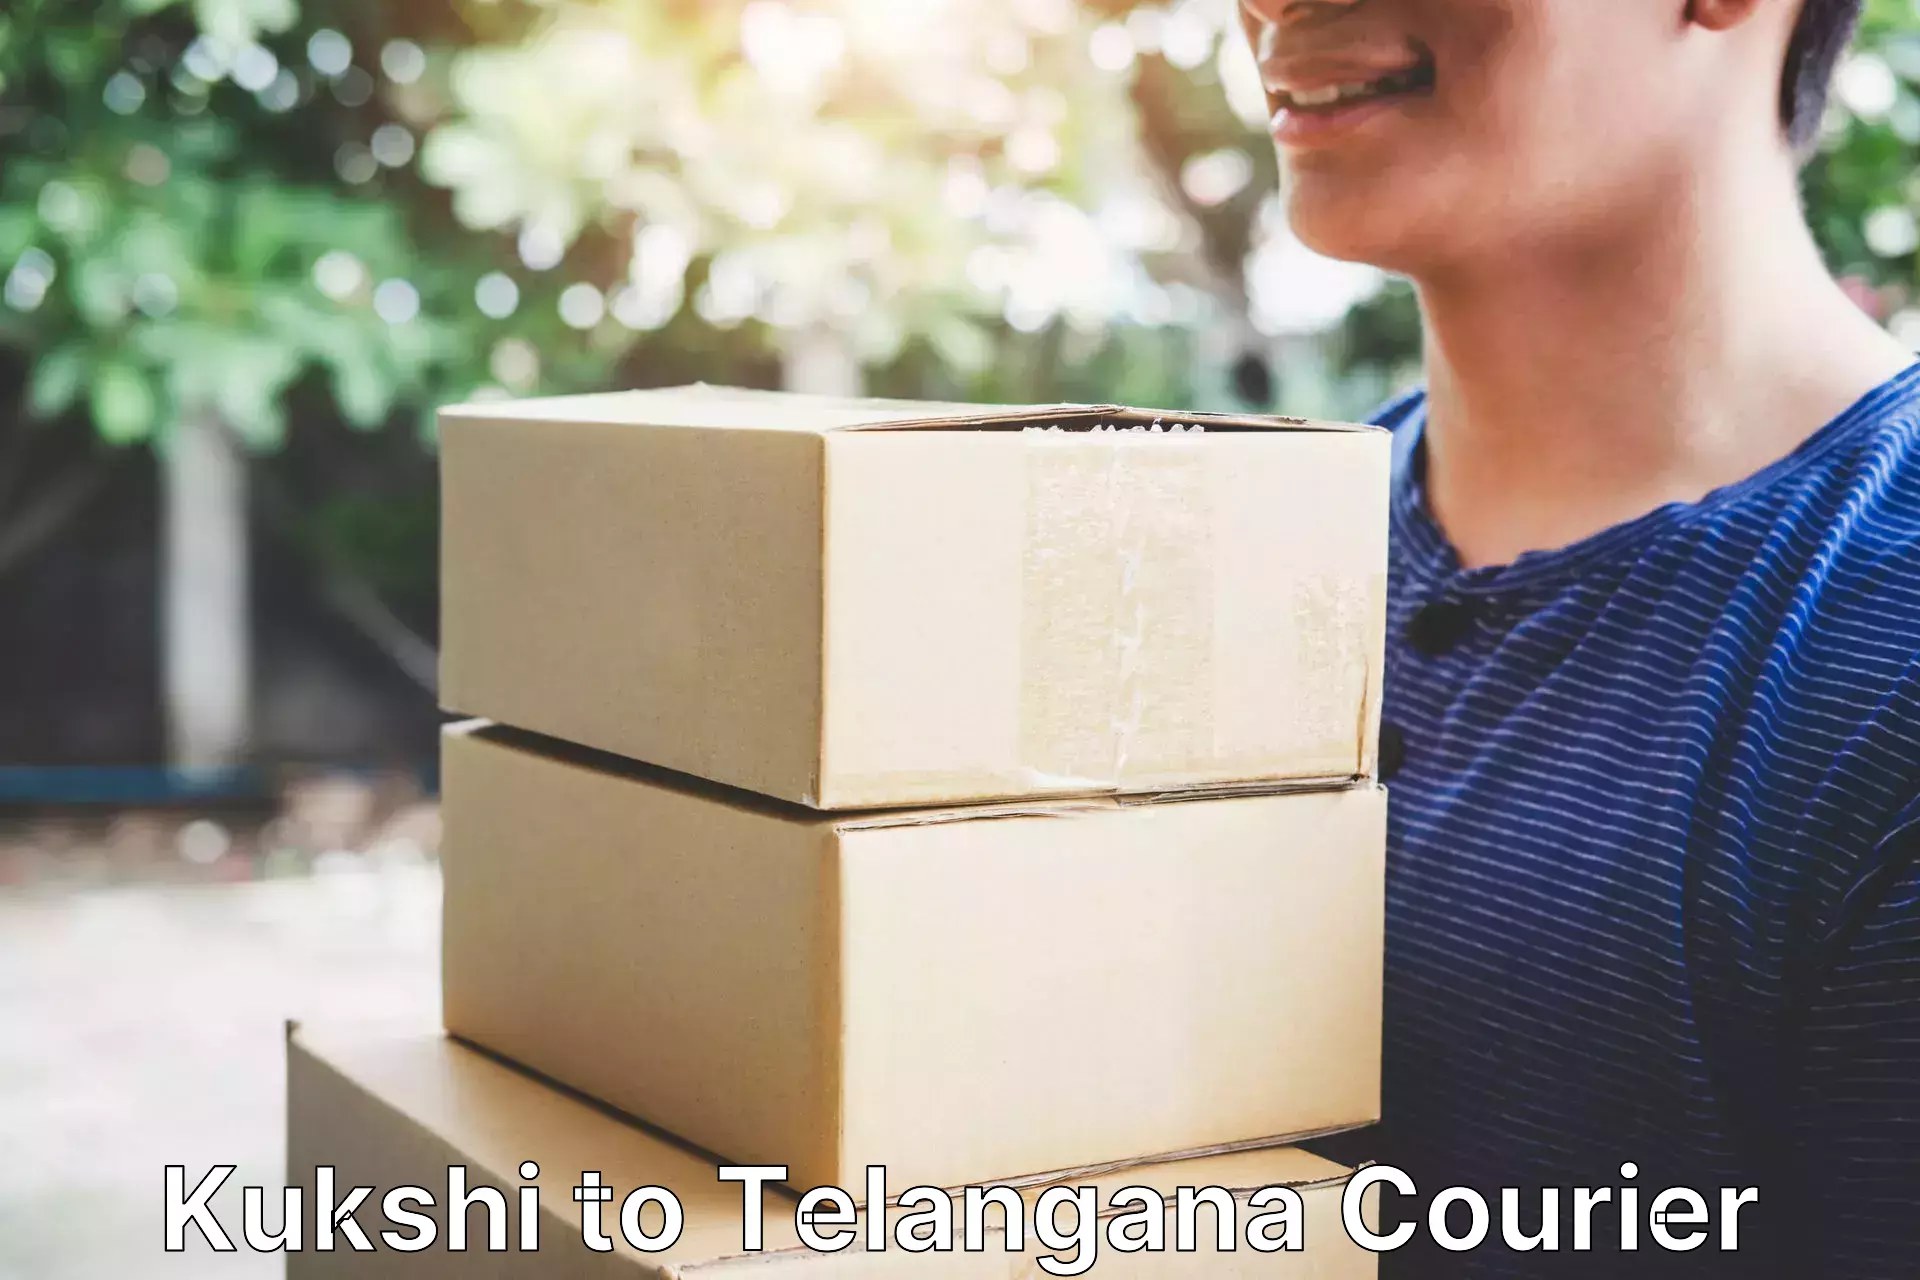 Local delivery service Kukshi to Telangana